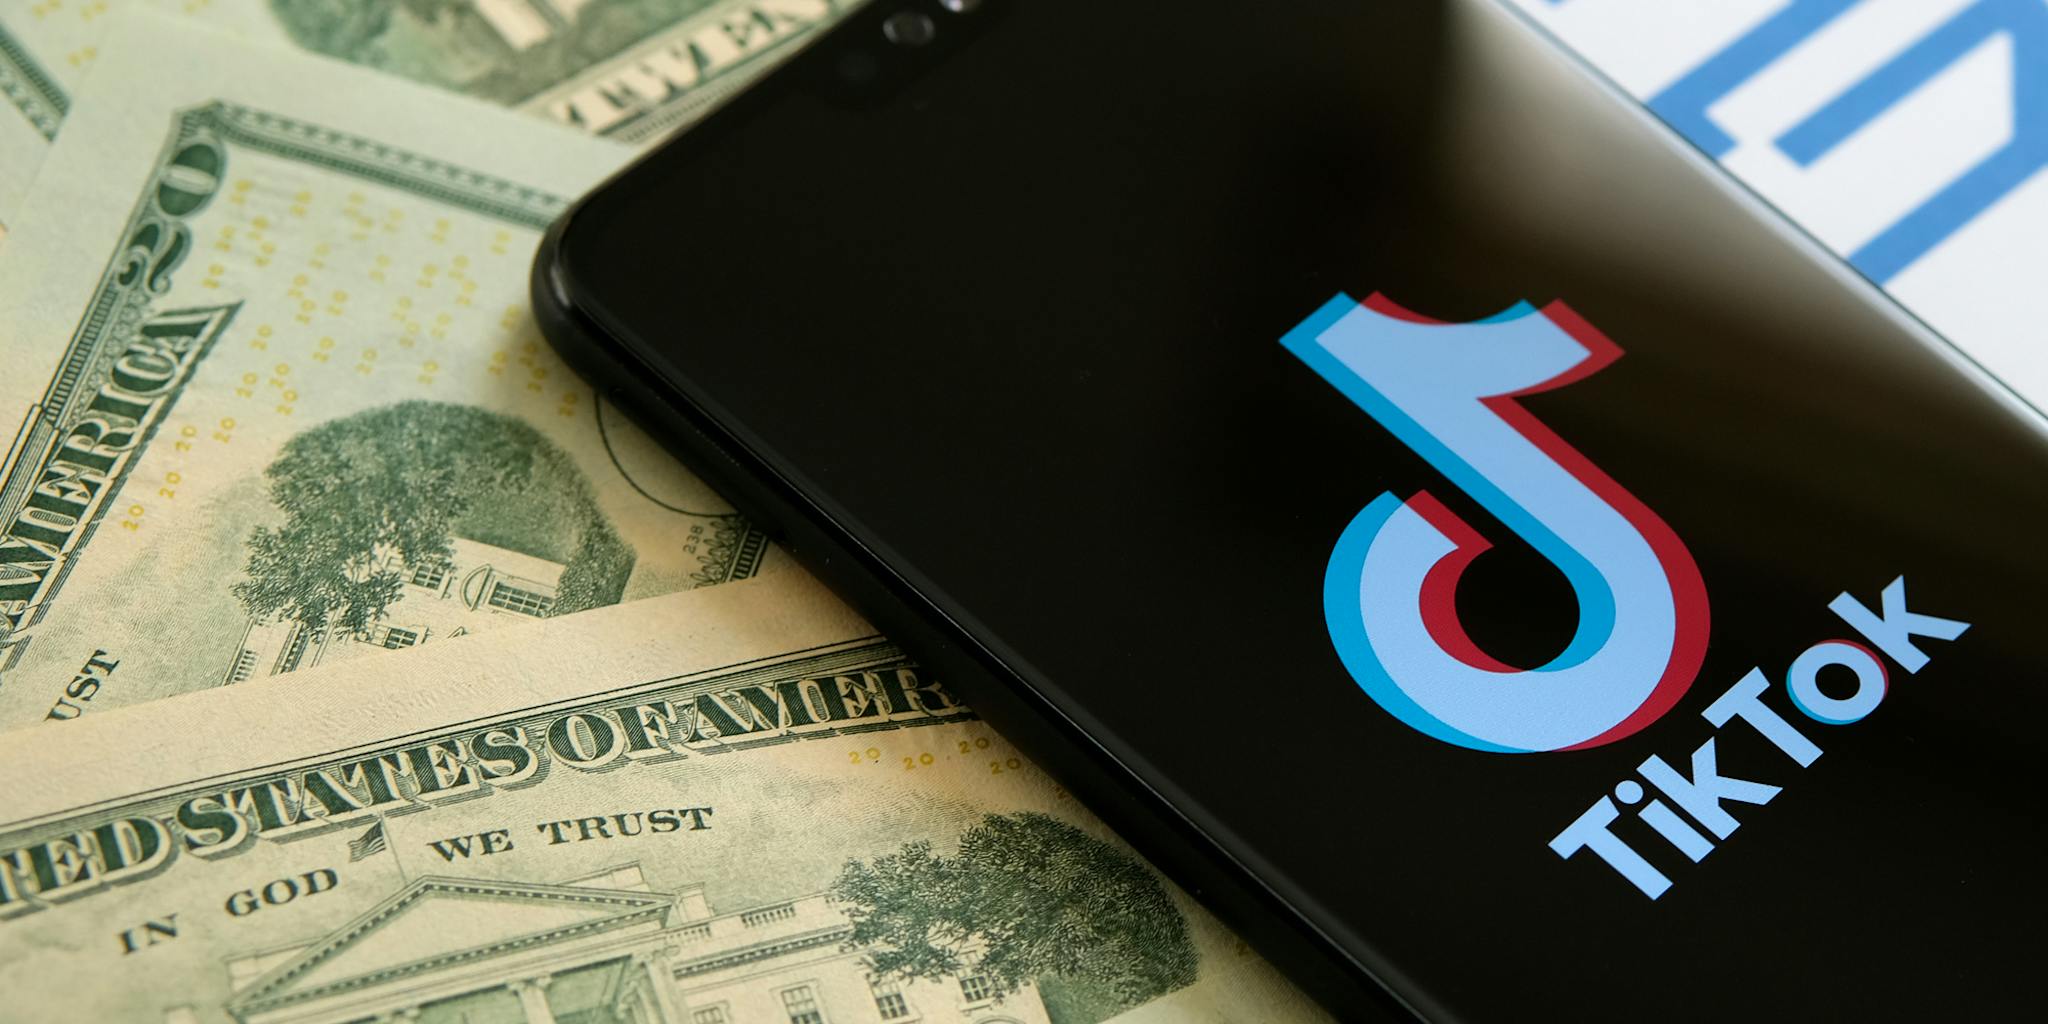 TikTok Agrees to Pay 92 Million to Settle Teen Privacy Lawsuit